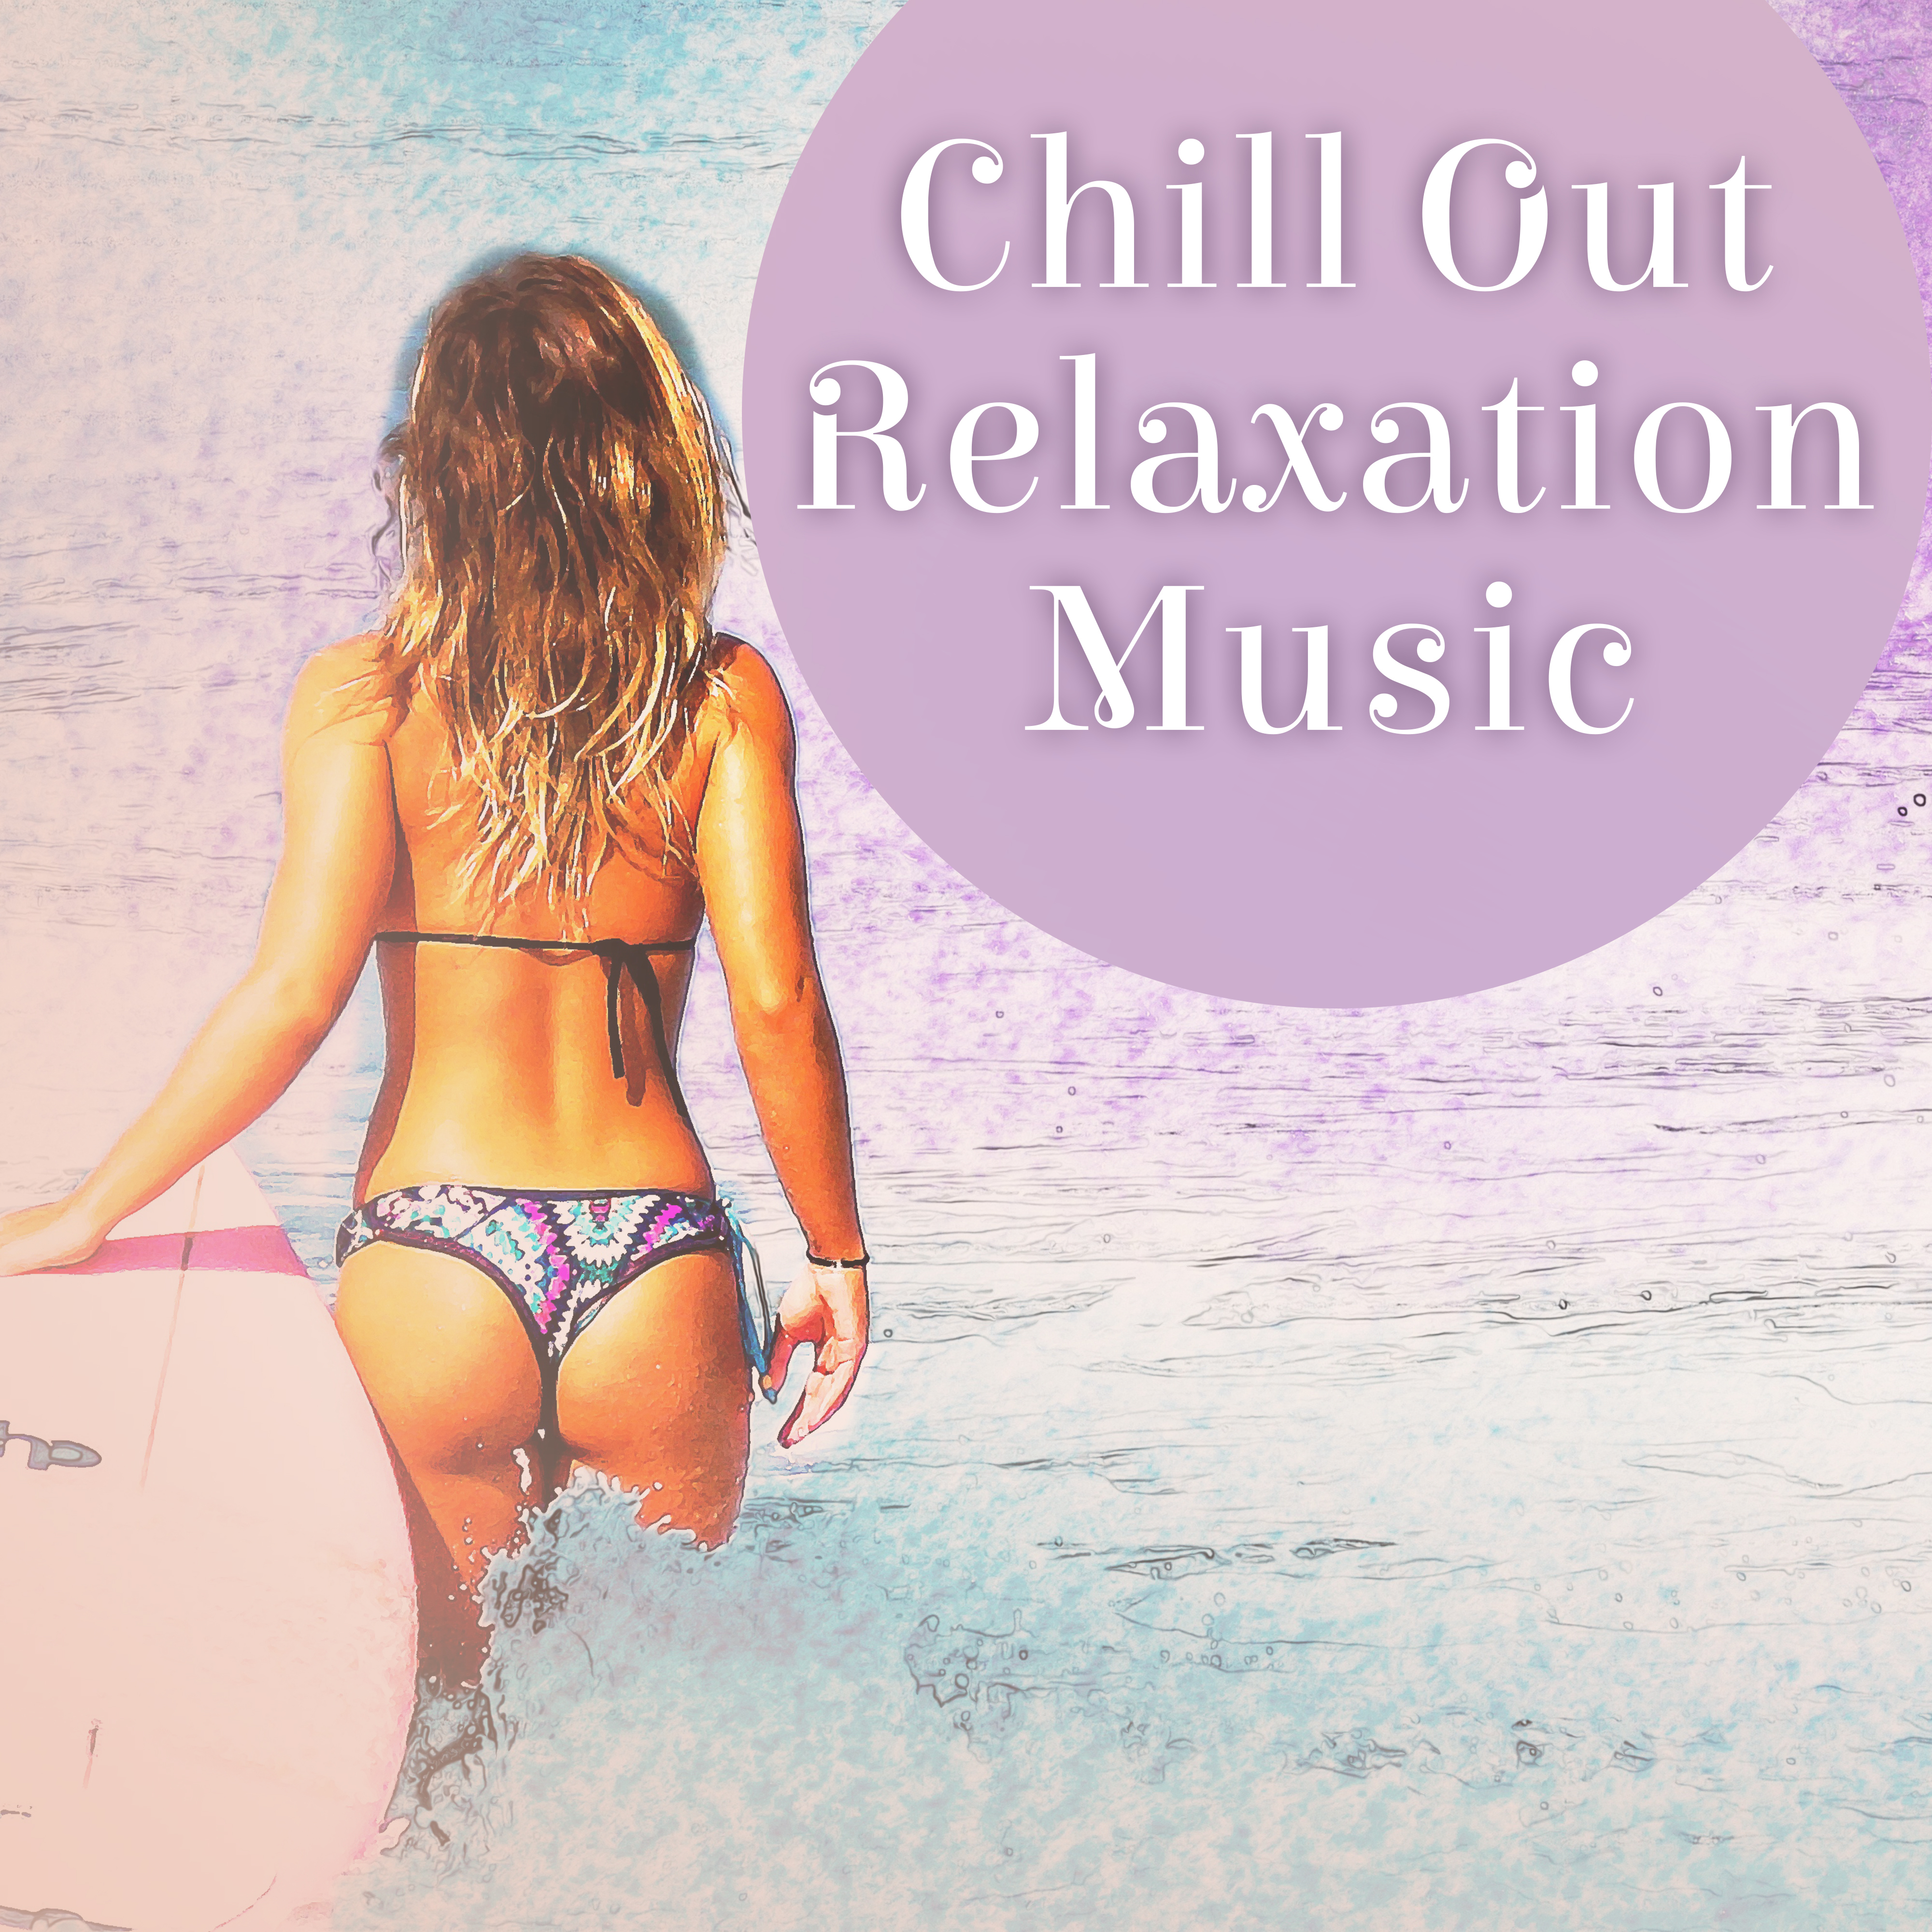 Chill Out Relaxation Music  Stress Relief, Chillout Yourself, Music for Summertime, Holiday Rest